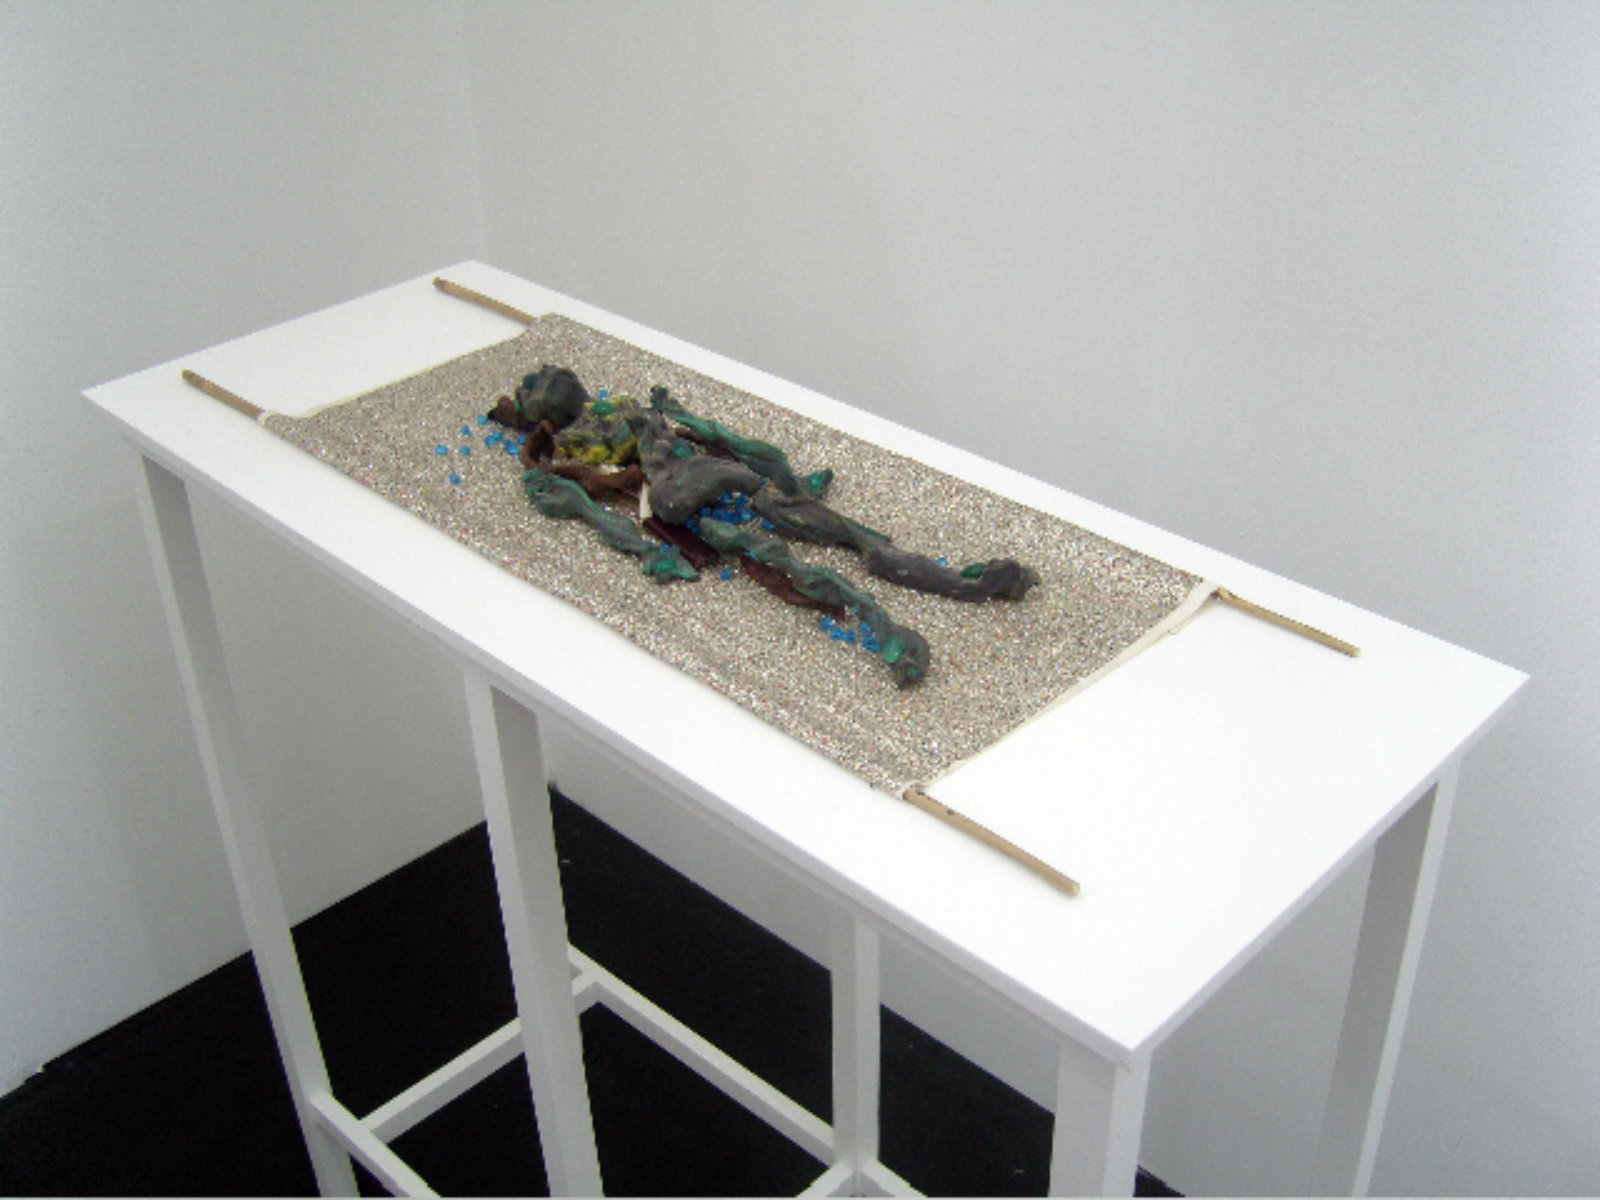 Christina Mackie, Green Figure, 2006, play-doh, green onyx, lighters, wax, rope, paint in seashell, glass beads, fabric and bamboo, 36 x 12 in. (92 x 30 cm)